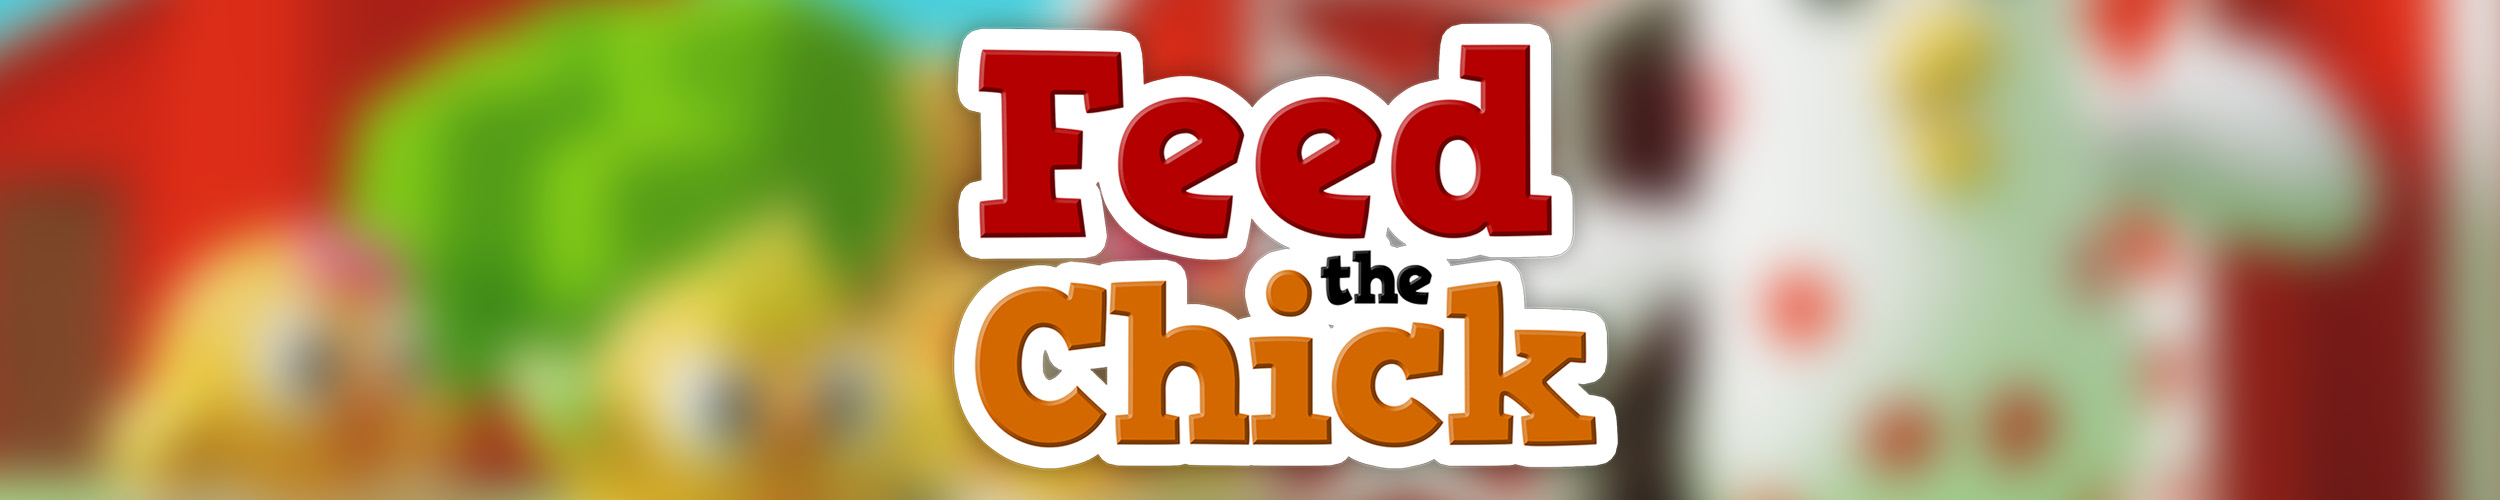 Feed the Chick